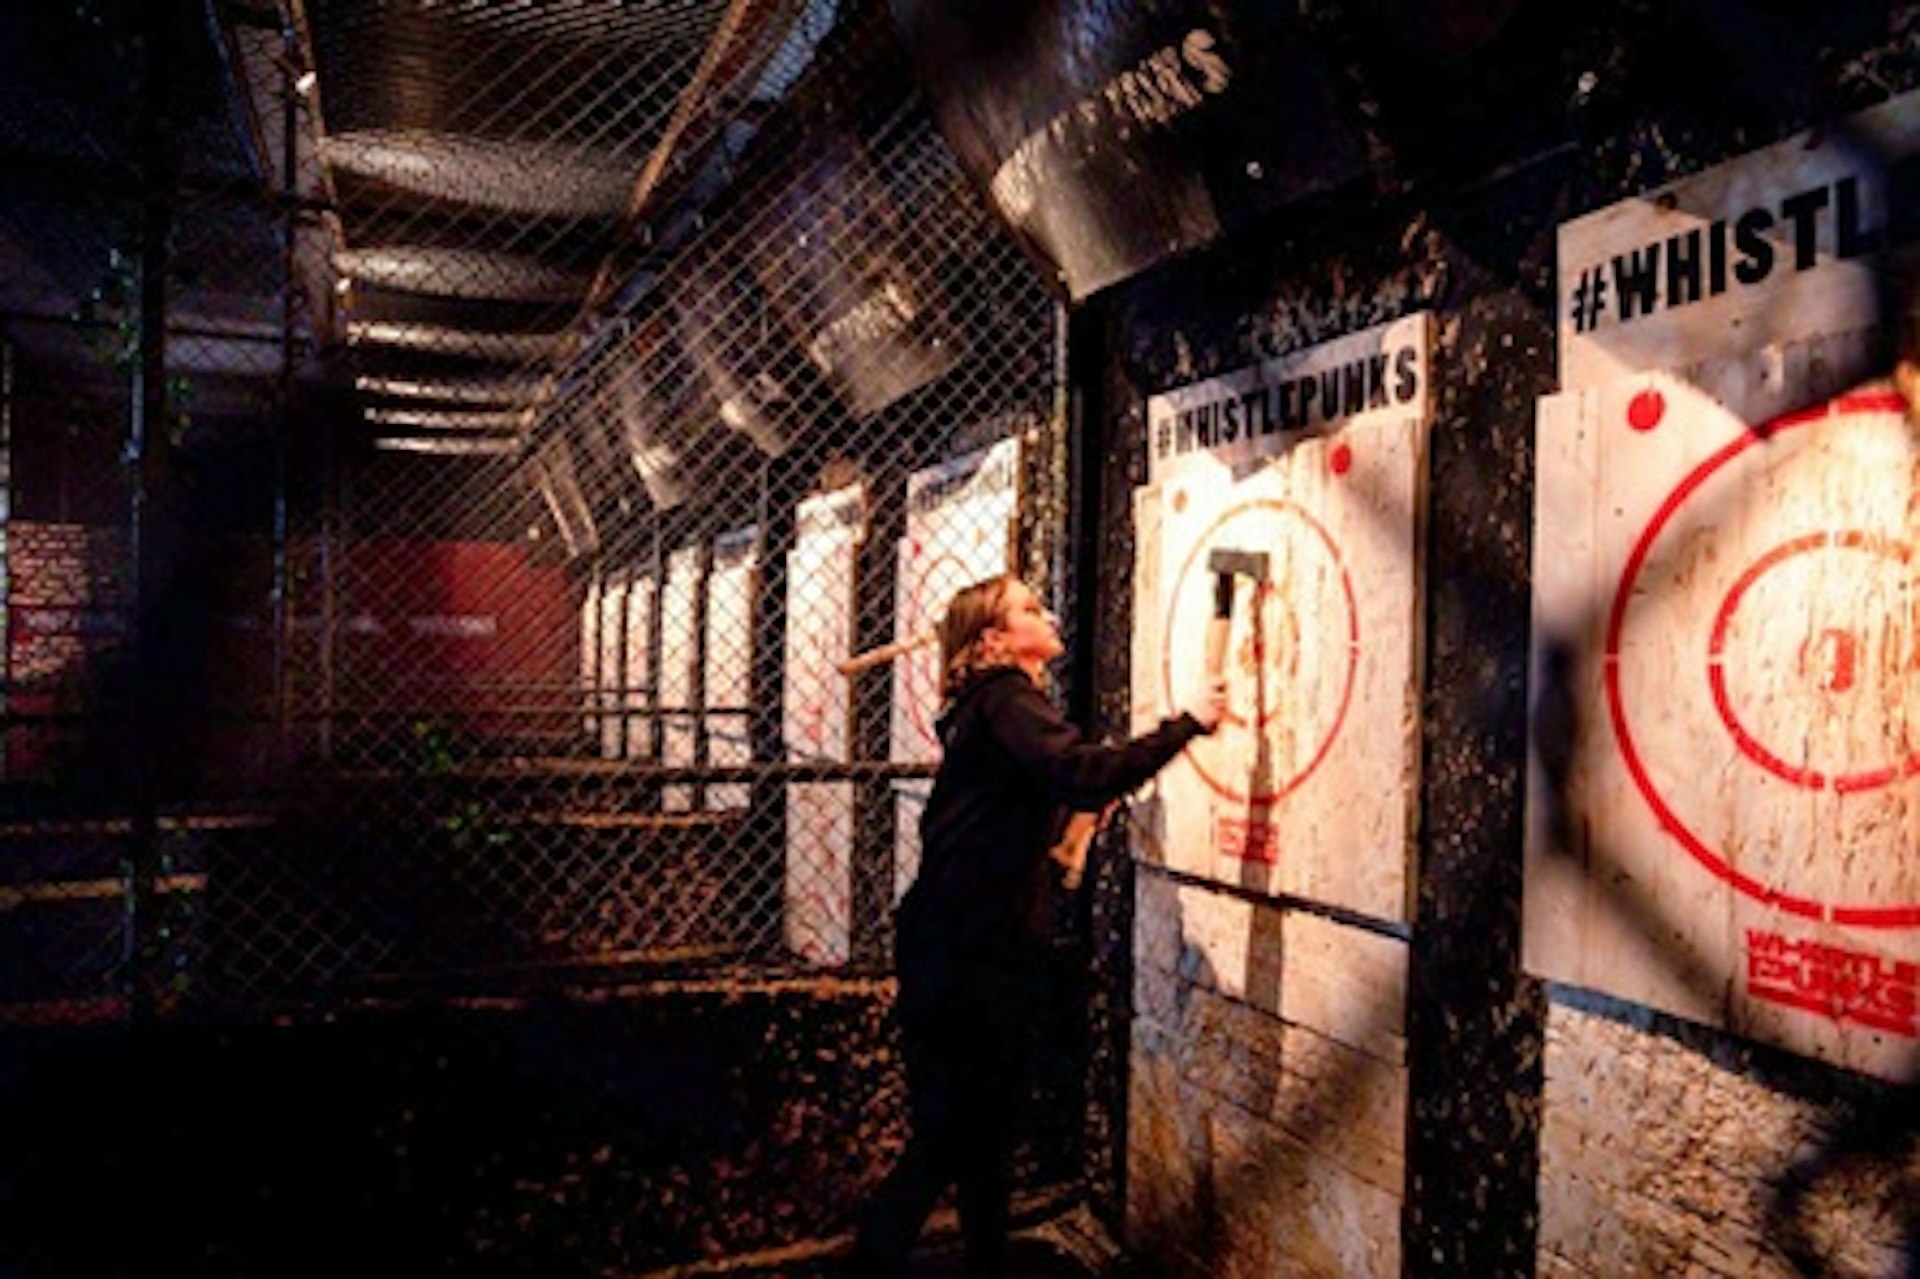 Urban Axe Throwing with a Beer for Two at Whistle Punks, Leeds, Manchester or Bristol 4